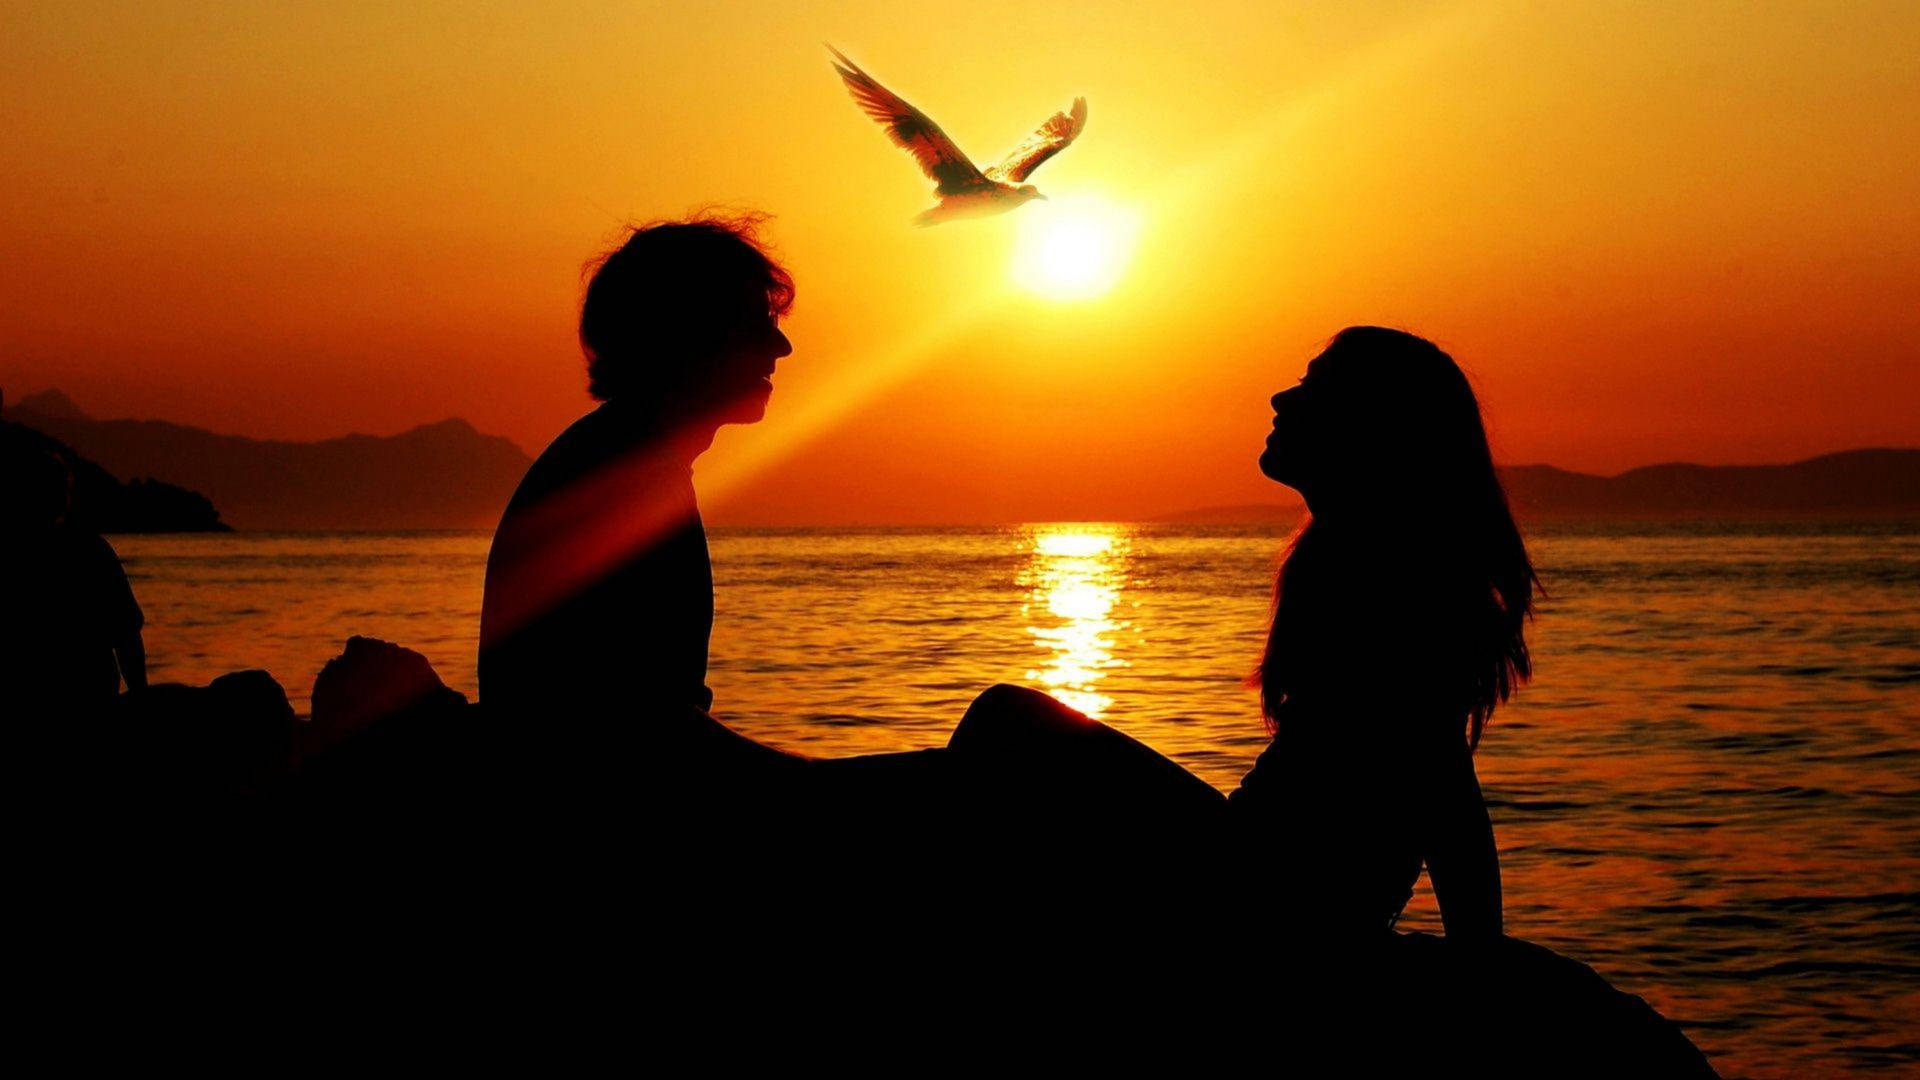 Download In Love Couples Romantic Sunset Wallpaper